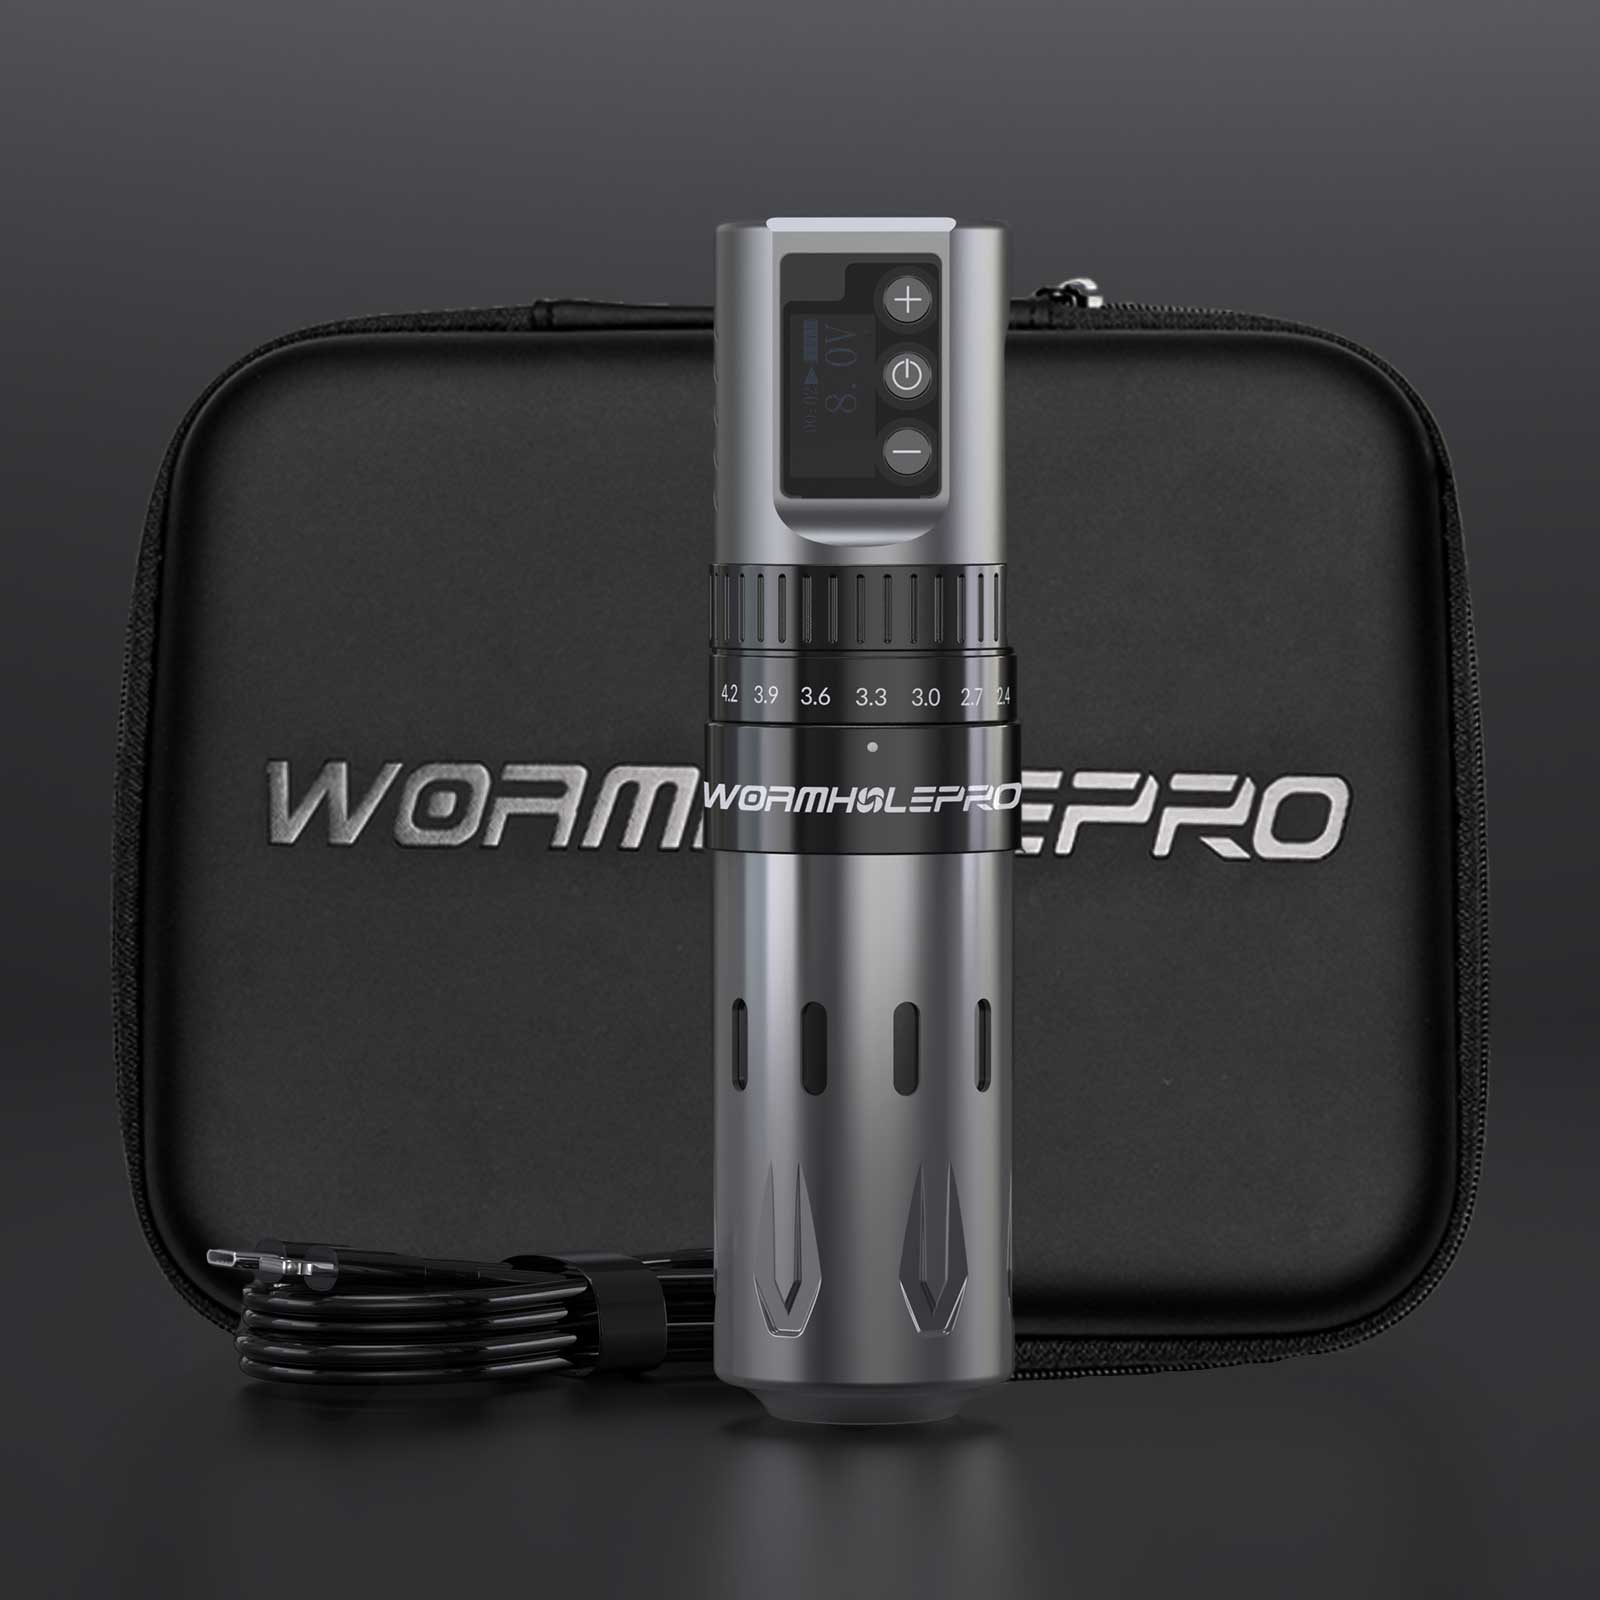 Wireless Precision Tattoo Pen Machine With 7 Stroke Length | Wormhole Pro Orion